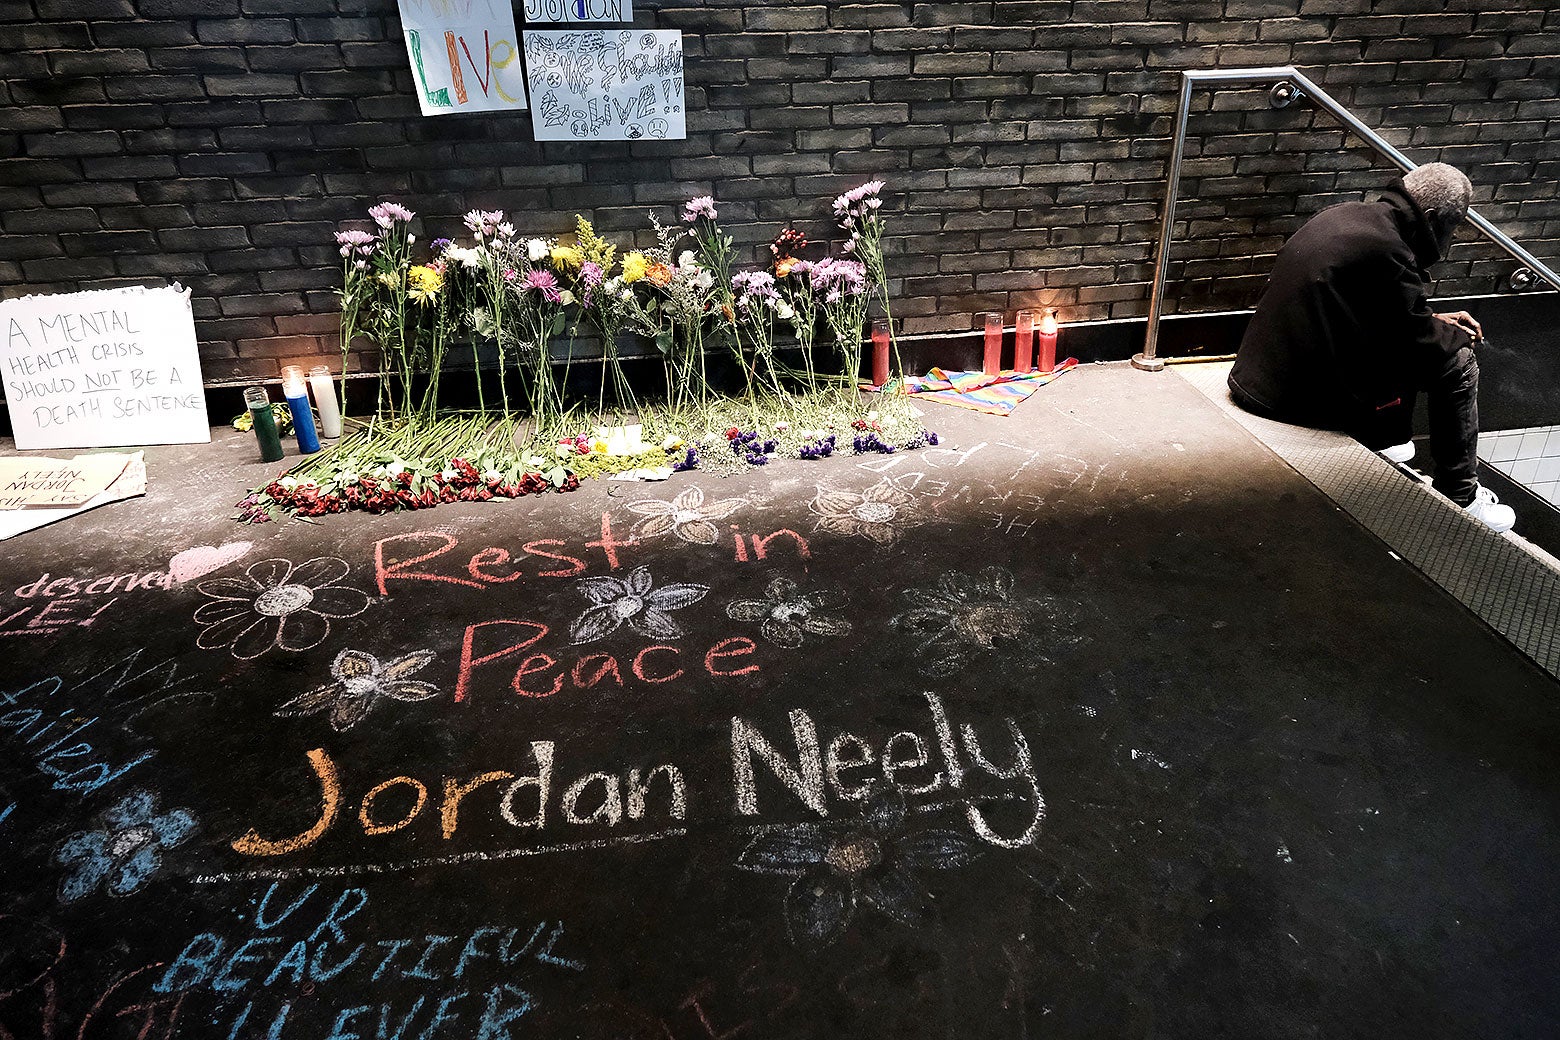 A brick exterior with flowers and prayer candles, with "Rest in Peace Jordan Neely" written in chalk on the concrete.